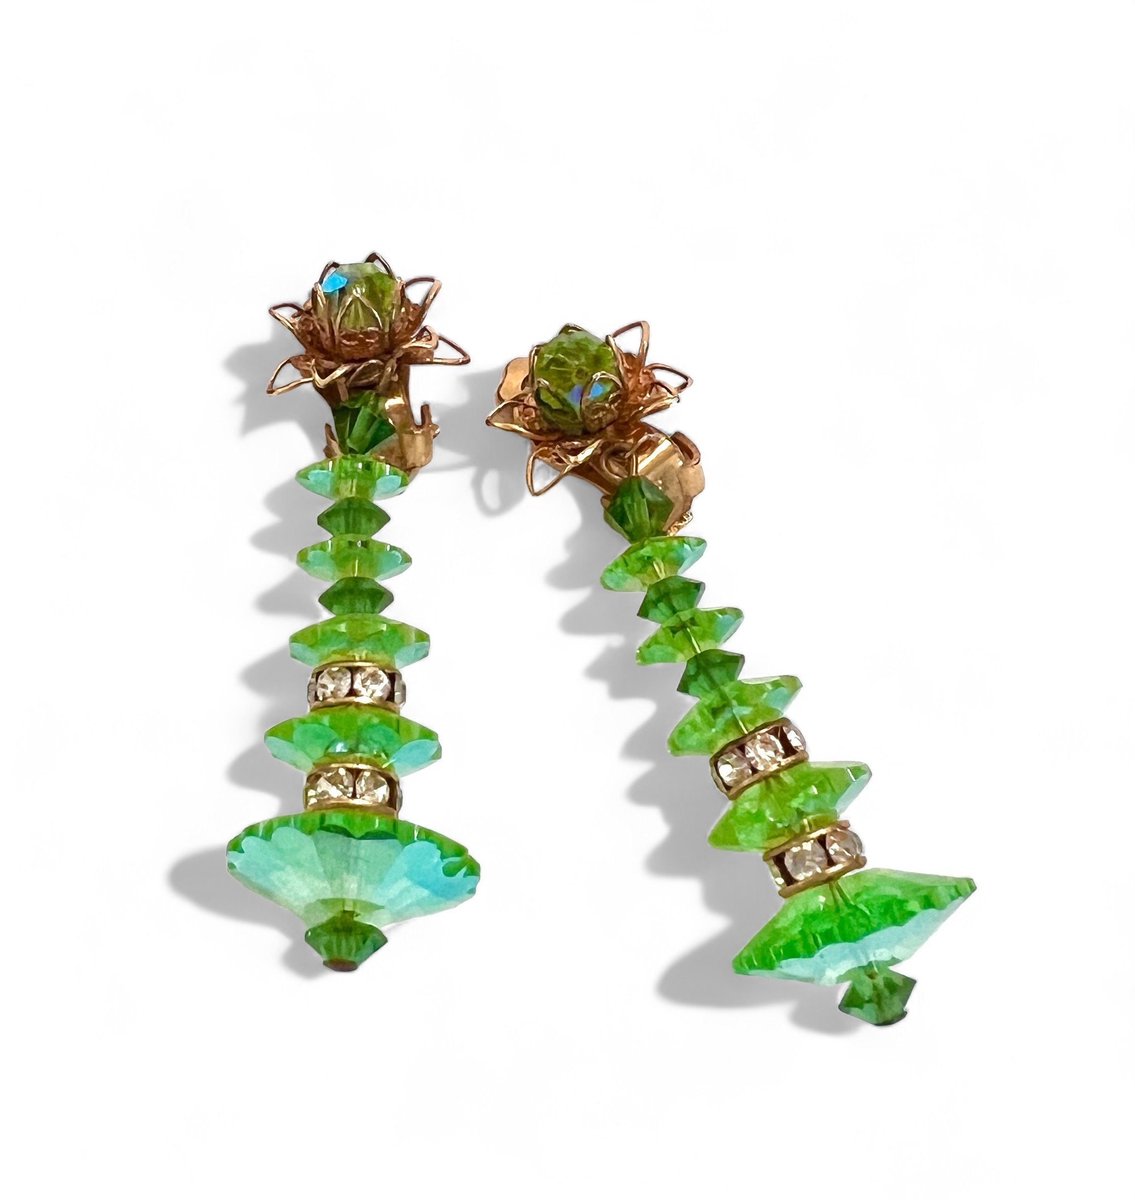 Unsigned Lewis Segal Dangle Earrings Green Margarita Crystals Sparkling Clear Rondells Clip-On Gold Tone Gift for Her $38.00 ➤ etsy.com/listing/172775…